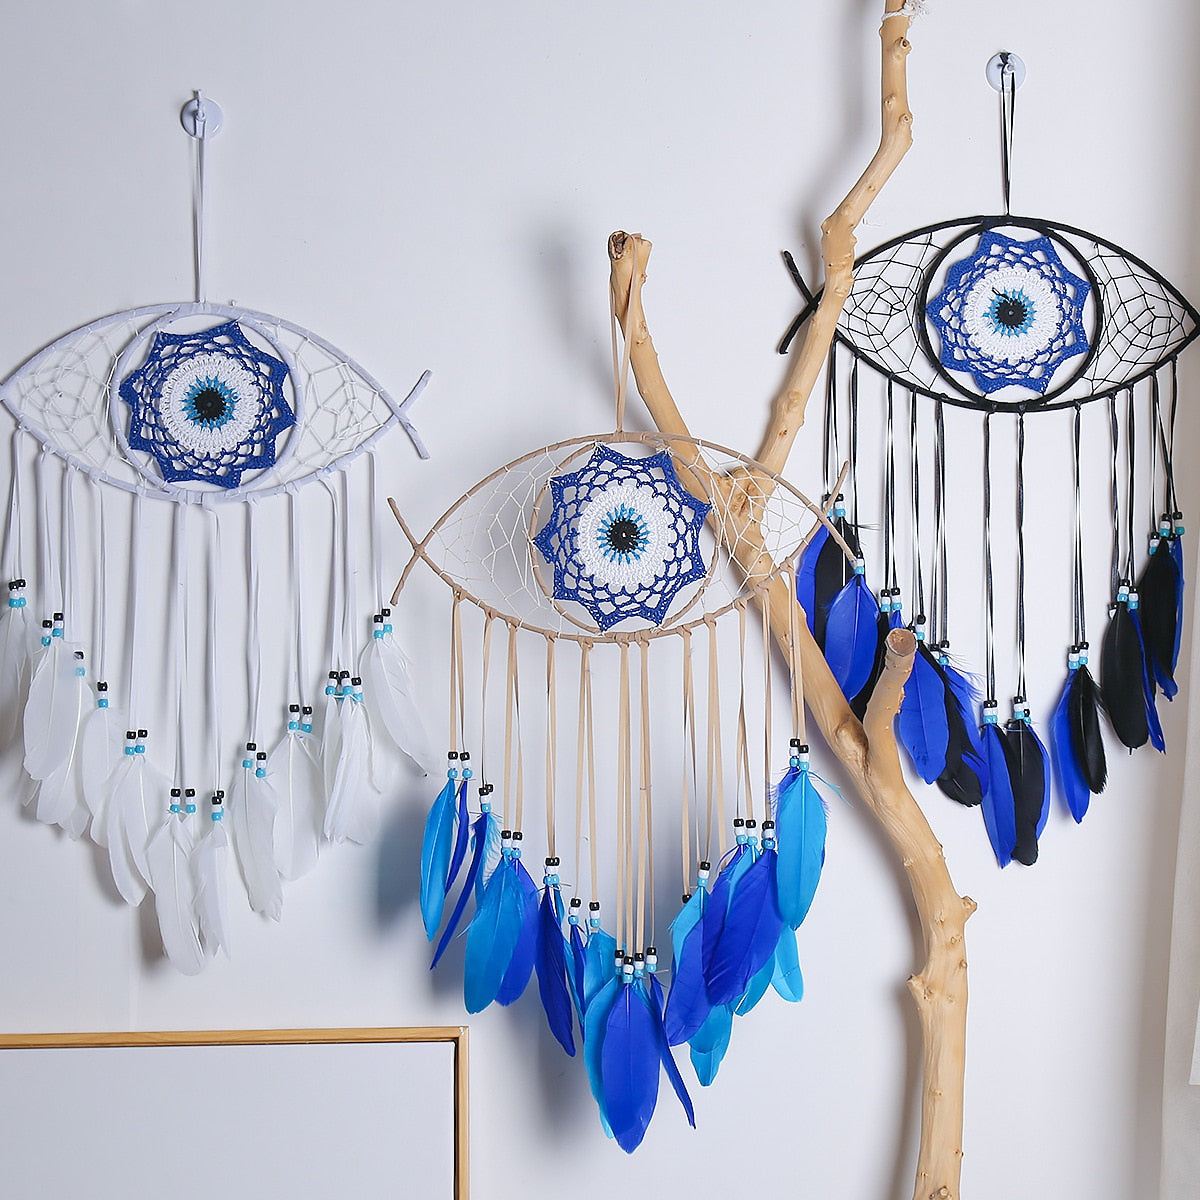 Dream Catcher Macrame Wall Hanging Bohemian Home Decor - Personal Hour for Yoga and Meditations 